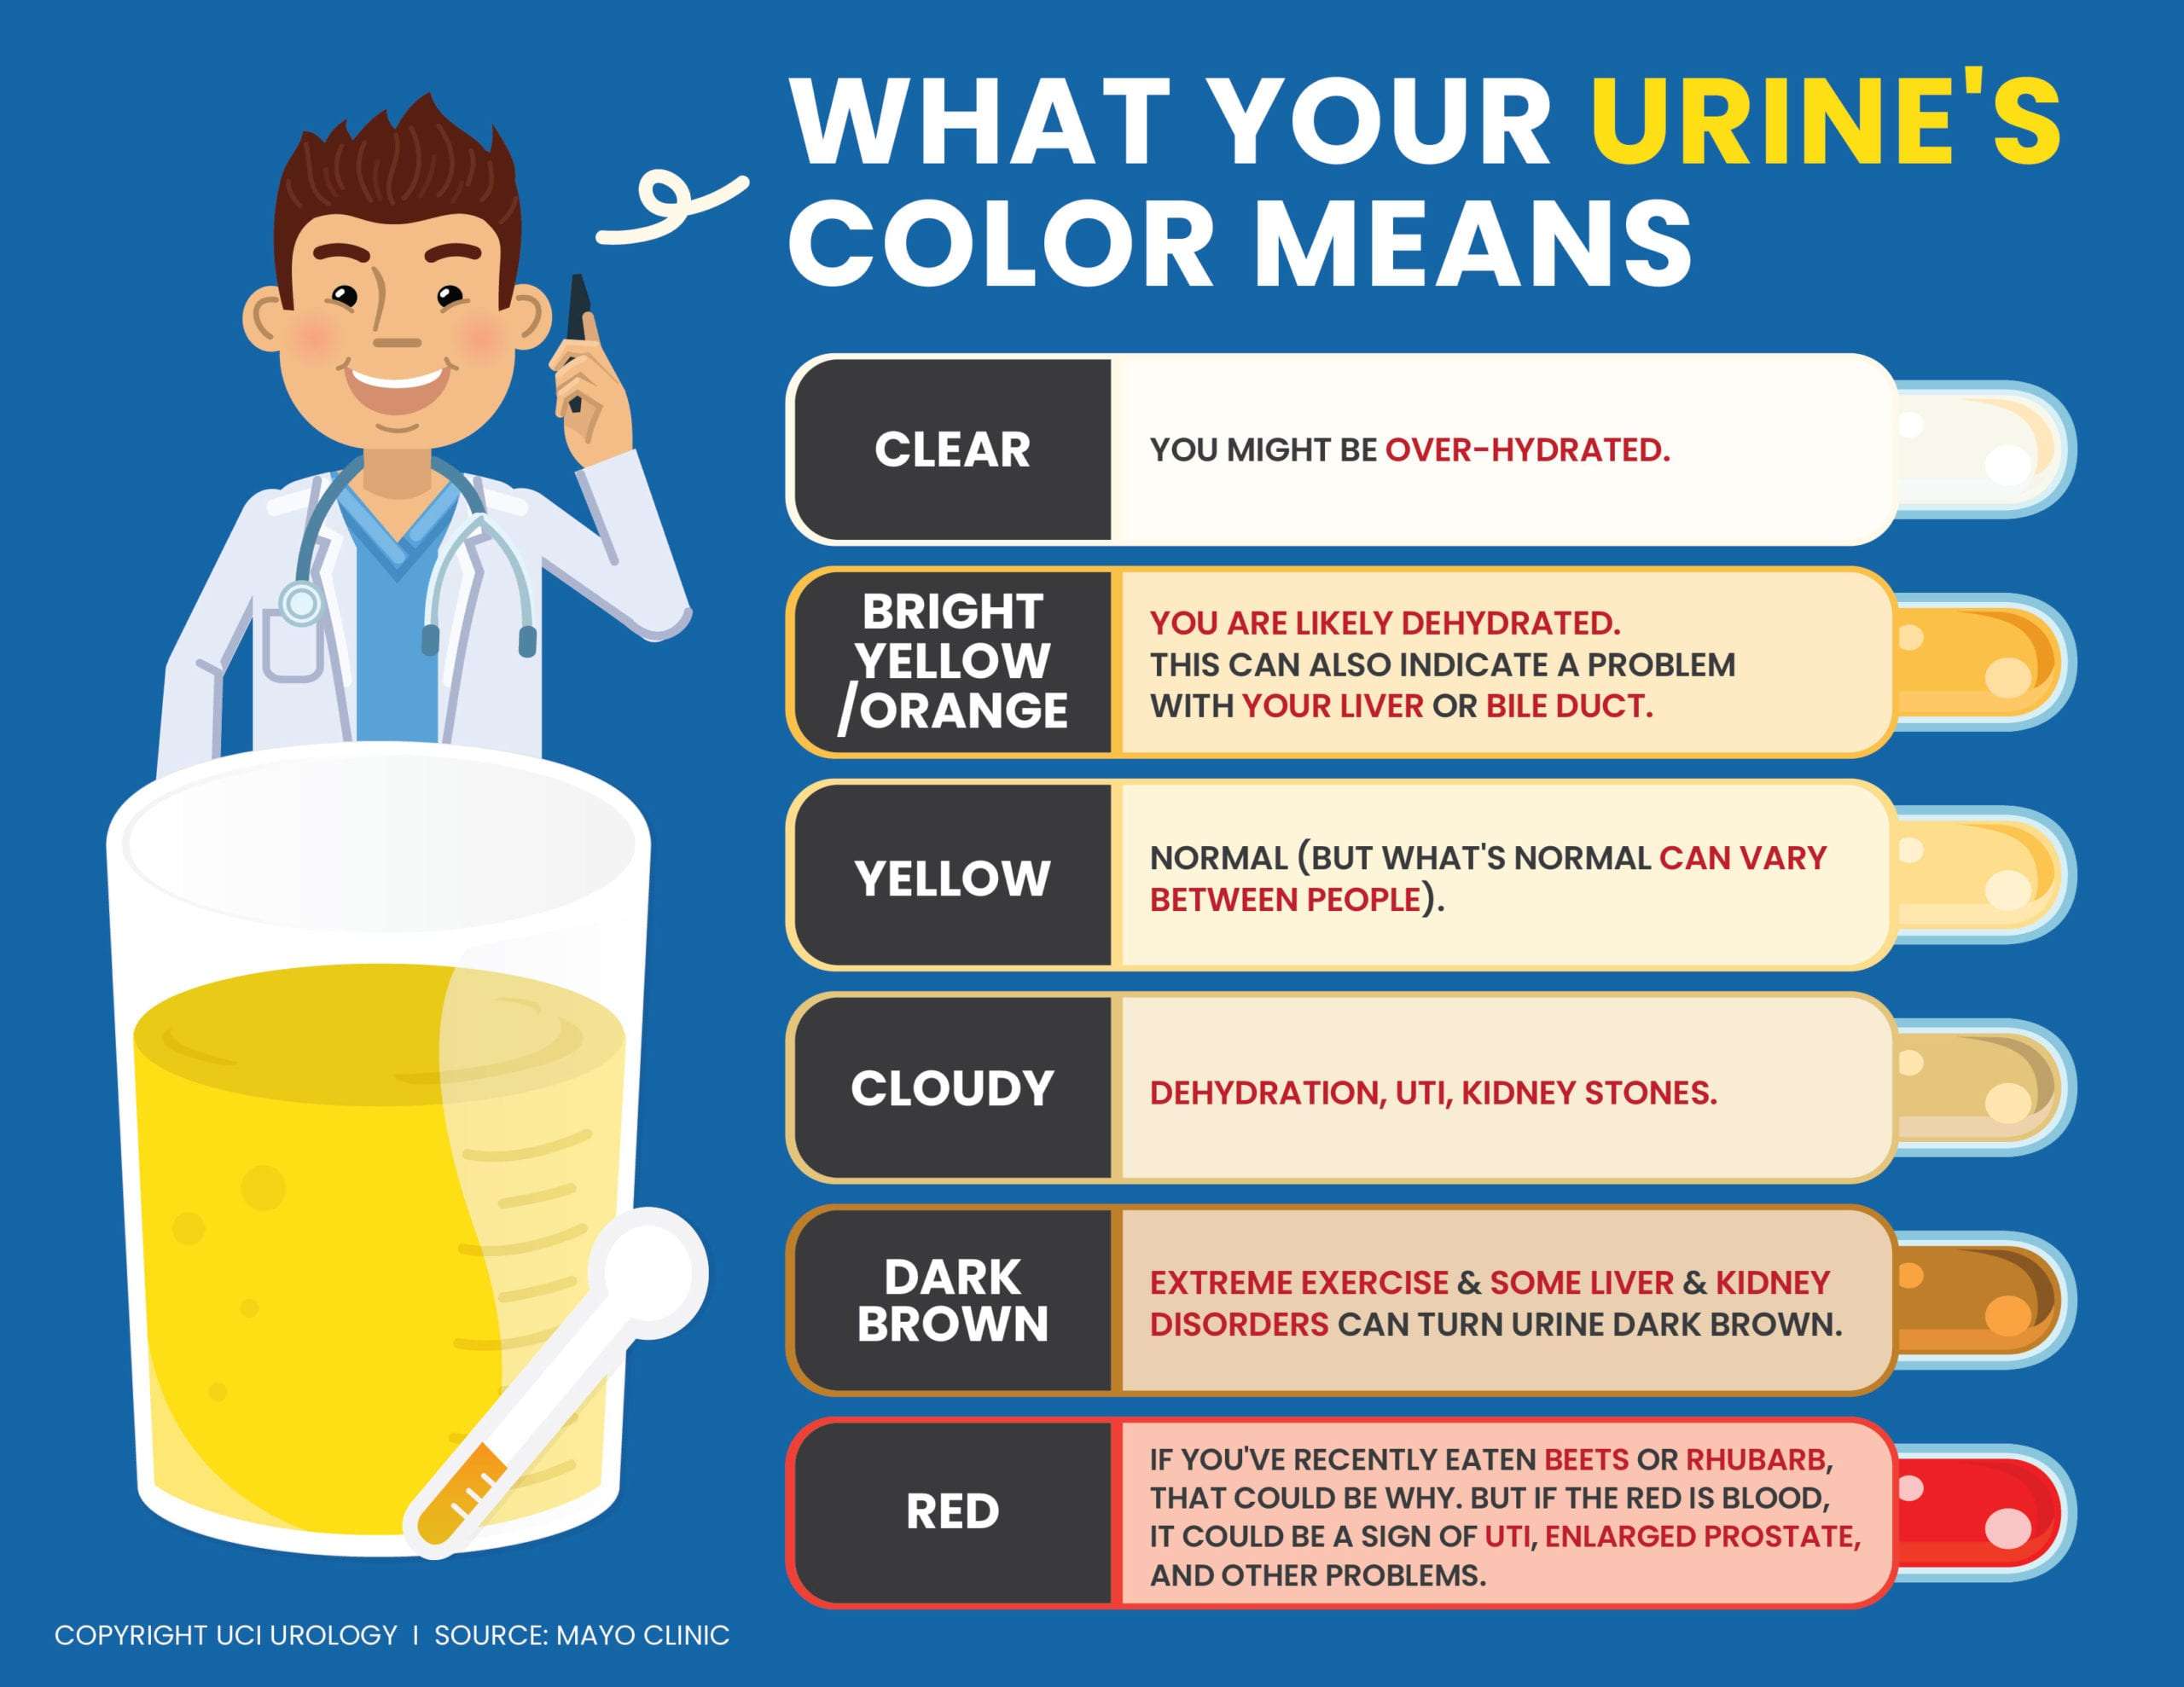 Urology Infographic: What Your Urine